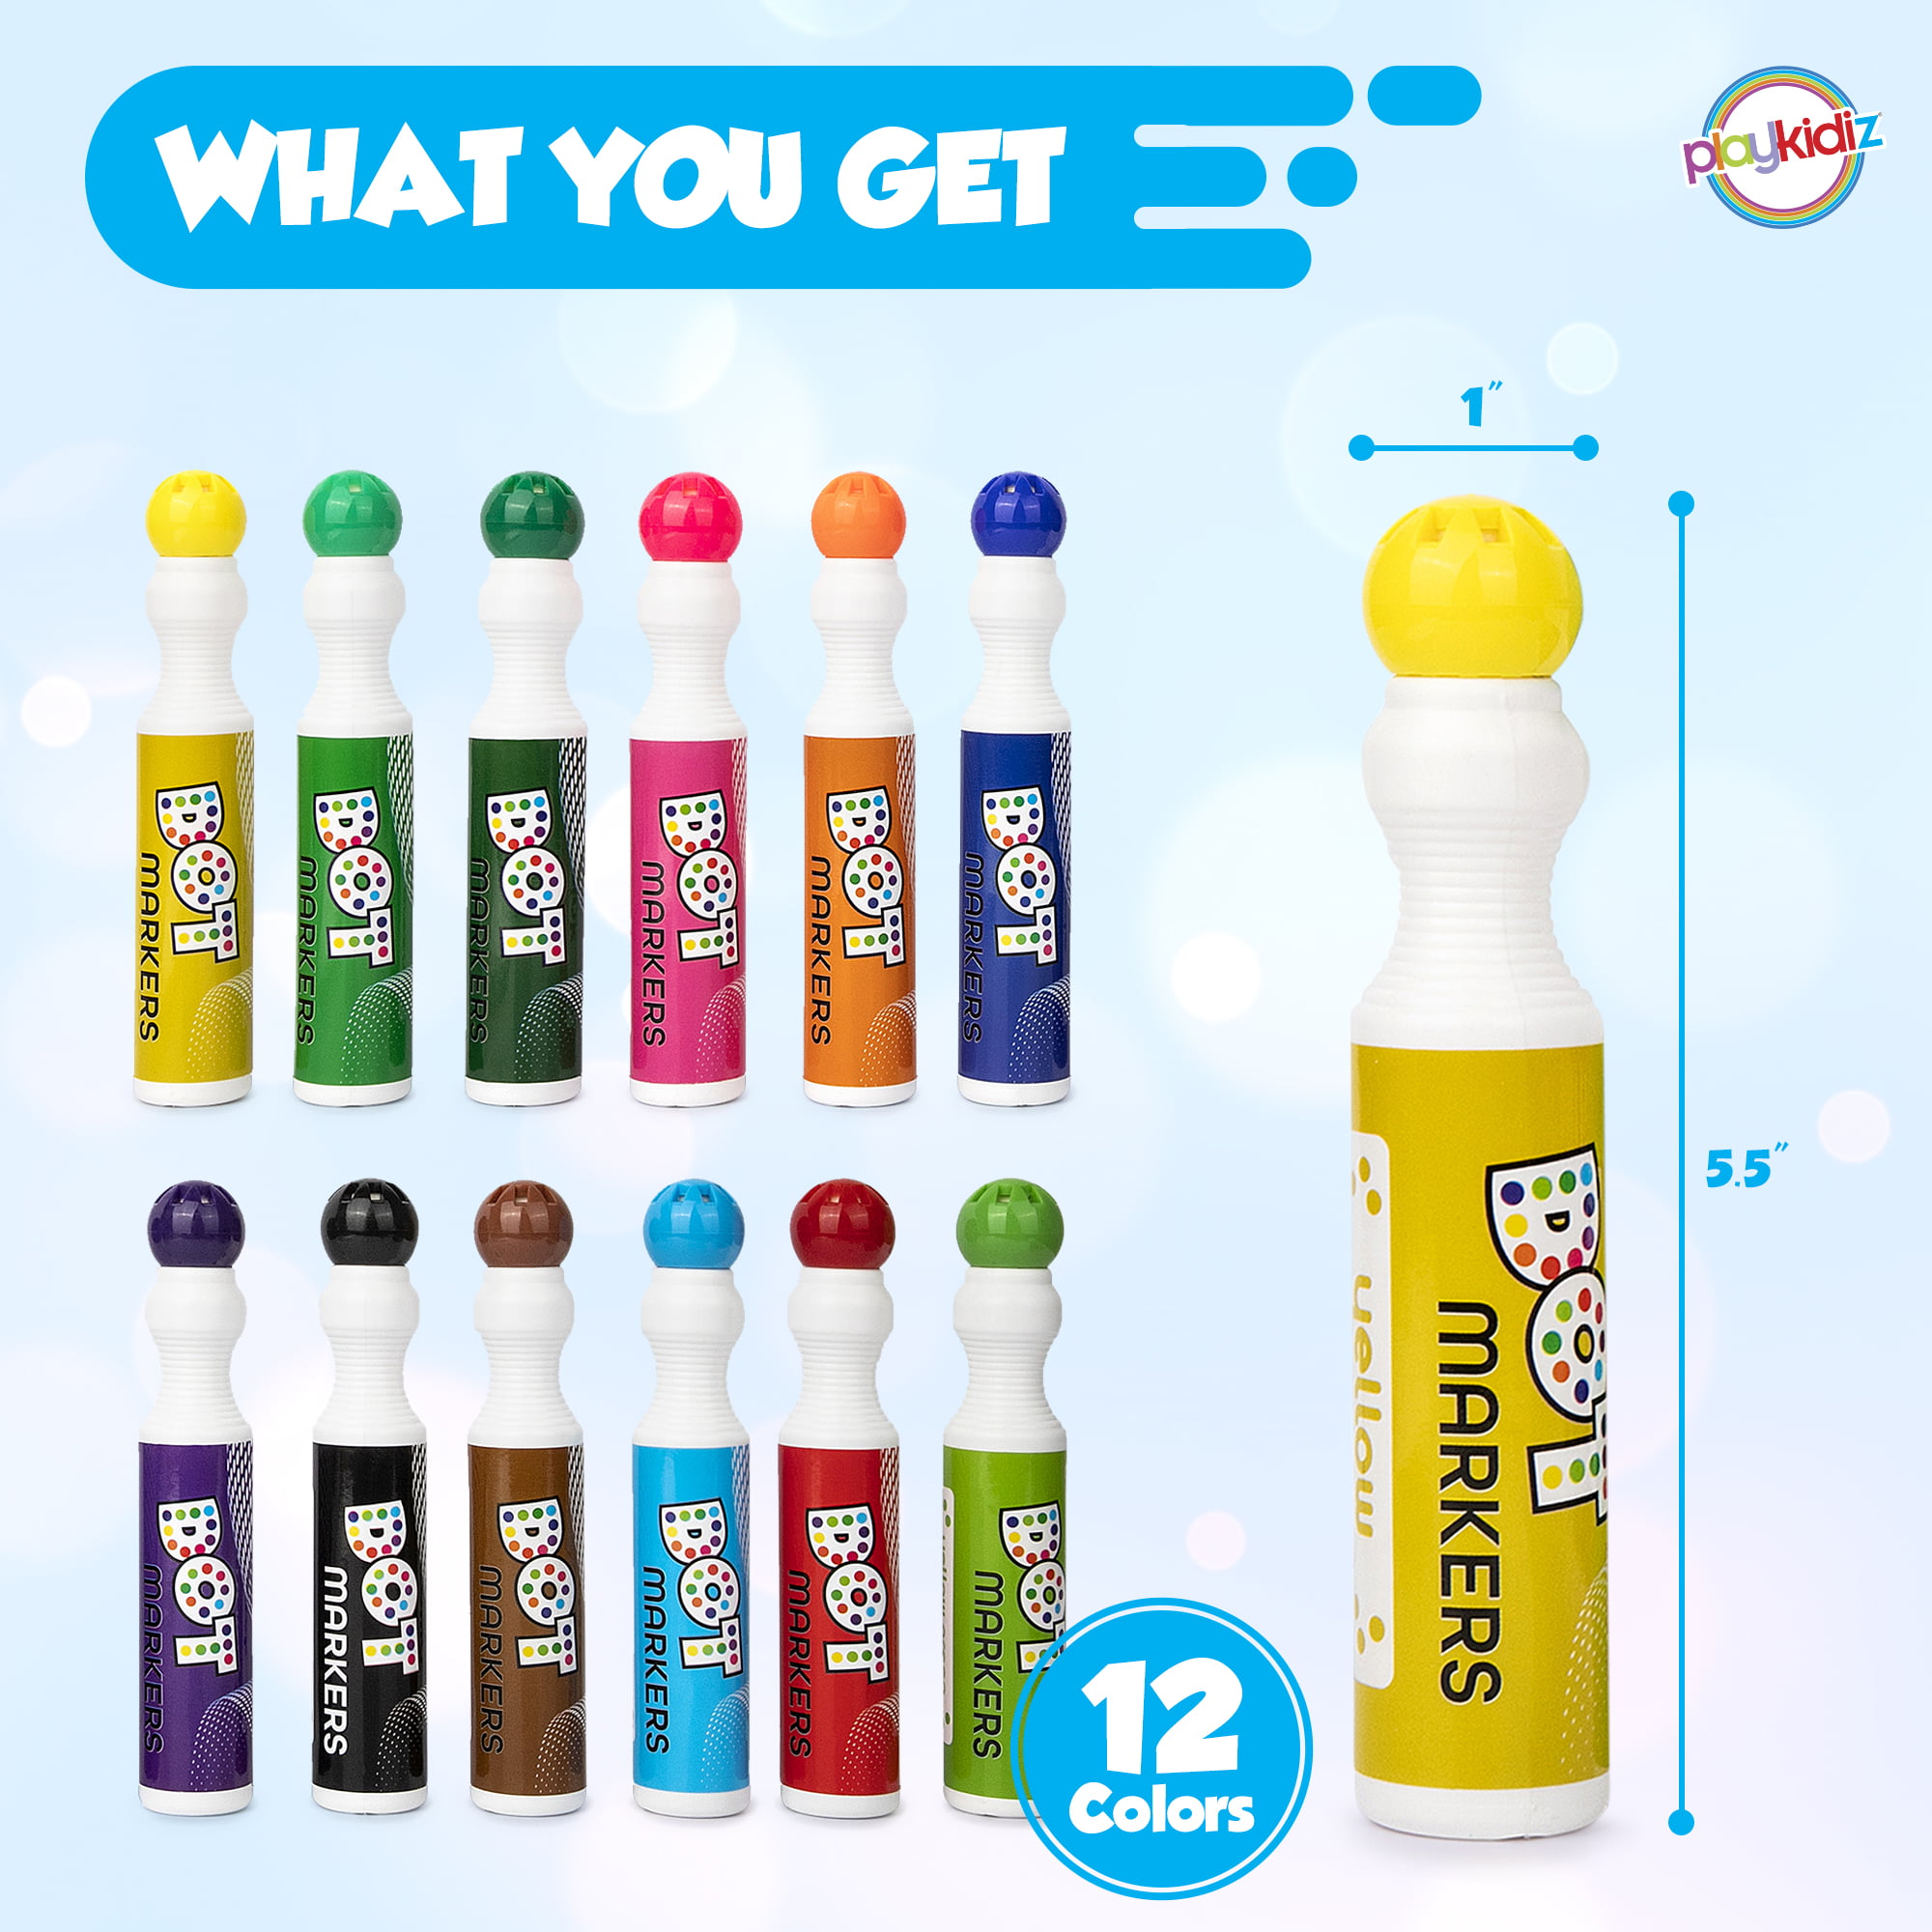  Mr. Pen- Washable Dot Markers for Toddlers and Kids,8 Colors  Paint Dotters , Dabbers , Bingo Markers/ Daubers, Non Toxic Paint Daubers,  Bingo Dotters. : Toys & Games